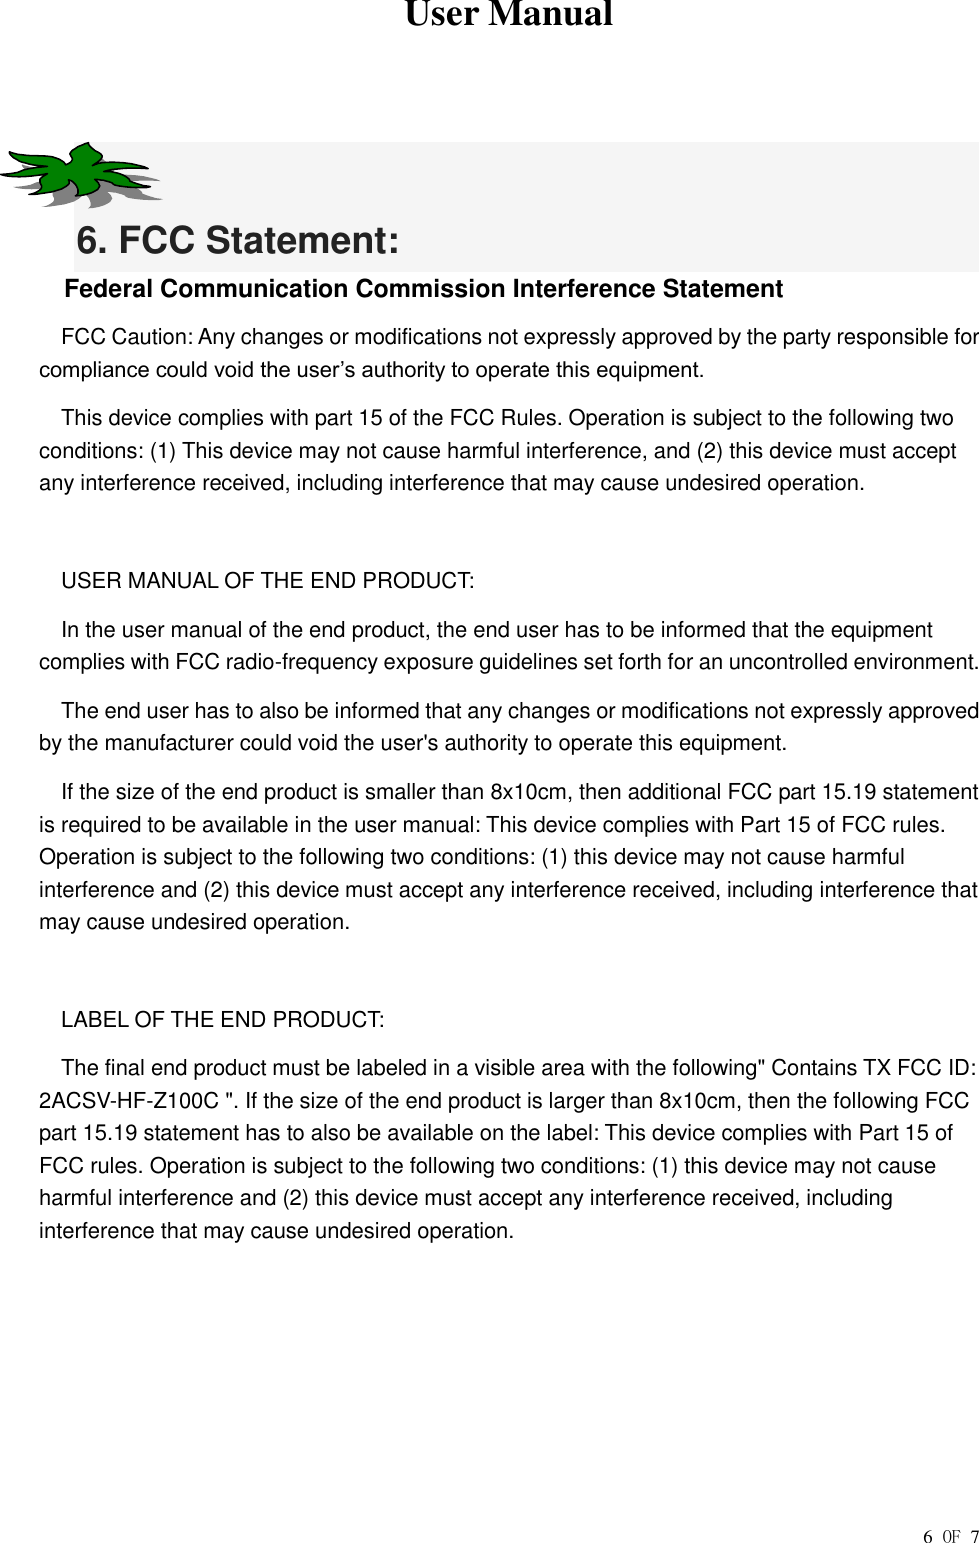  User Manual        6 OF 7   6. FCC Statement: Federal Communication Commission Interference Statement FCC Caution: Any changes or modifications not expressly approved by the party responsible for compliance could void the user’s authority to operate this equipment. This device complies with part 15 of the FCC Rules. Operation is subject to the following two conditions: (1) This device may not cause harmful interference, and (2) this device must accept any interference received, including interference that may cause undesired operation.  USER MANUAL OF THE END PRODUCT: In the user manual of the end product, the end user has to be informed that the equipment complies with FCC radio-frequency exposure guidelines set forth for an uncontrolled environment. The end user has to also be informed that any changes or modifications not expressly approved by the manufacturer could void the user&apos;s authority to operate this equipment. If the size of the end product is smaller than 8x10cm, then additional FCC part 15.19 statement is required to be available in the user manual: This device complies with Part 15 of FCC rules. Operation is subject to the following two conditions: (1) this device may not cause harmful interference and (2) this device must accept any interference received, including interference that may cause undesired operation.  LABEL OF THE END PRODUCT: The final end product must be labeled in a visible area with the following&quot; Contains TX FCC ID: 2ACSV-HF-Z100C &quot;. If the size of the end product is larger than 8x10cm, then the following FCC part 15.19 statement has to also be available on the label: This device complies with Part 15 of FCC rules. Operation is subject to the following two conditions: (1) this device may not cause harmful interference and (2) this device must accept any interference received, including interference that may cause undesired operation. 